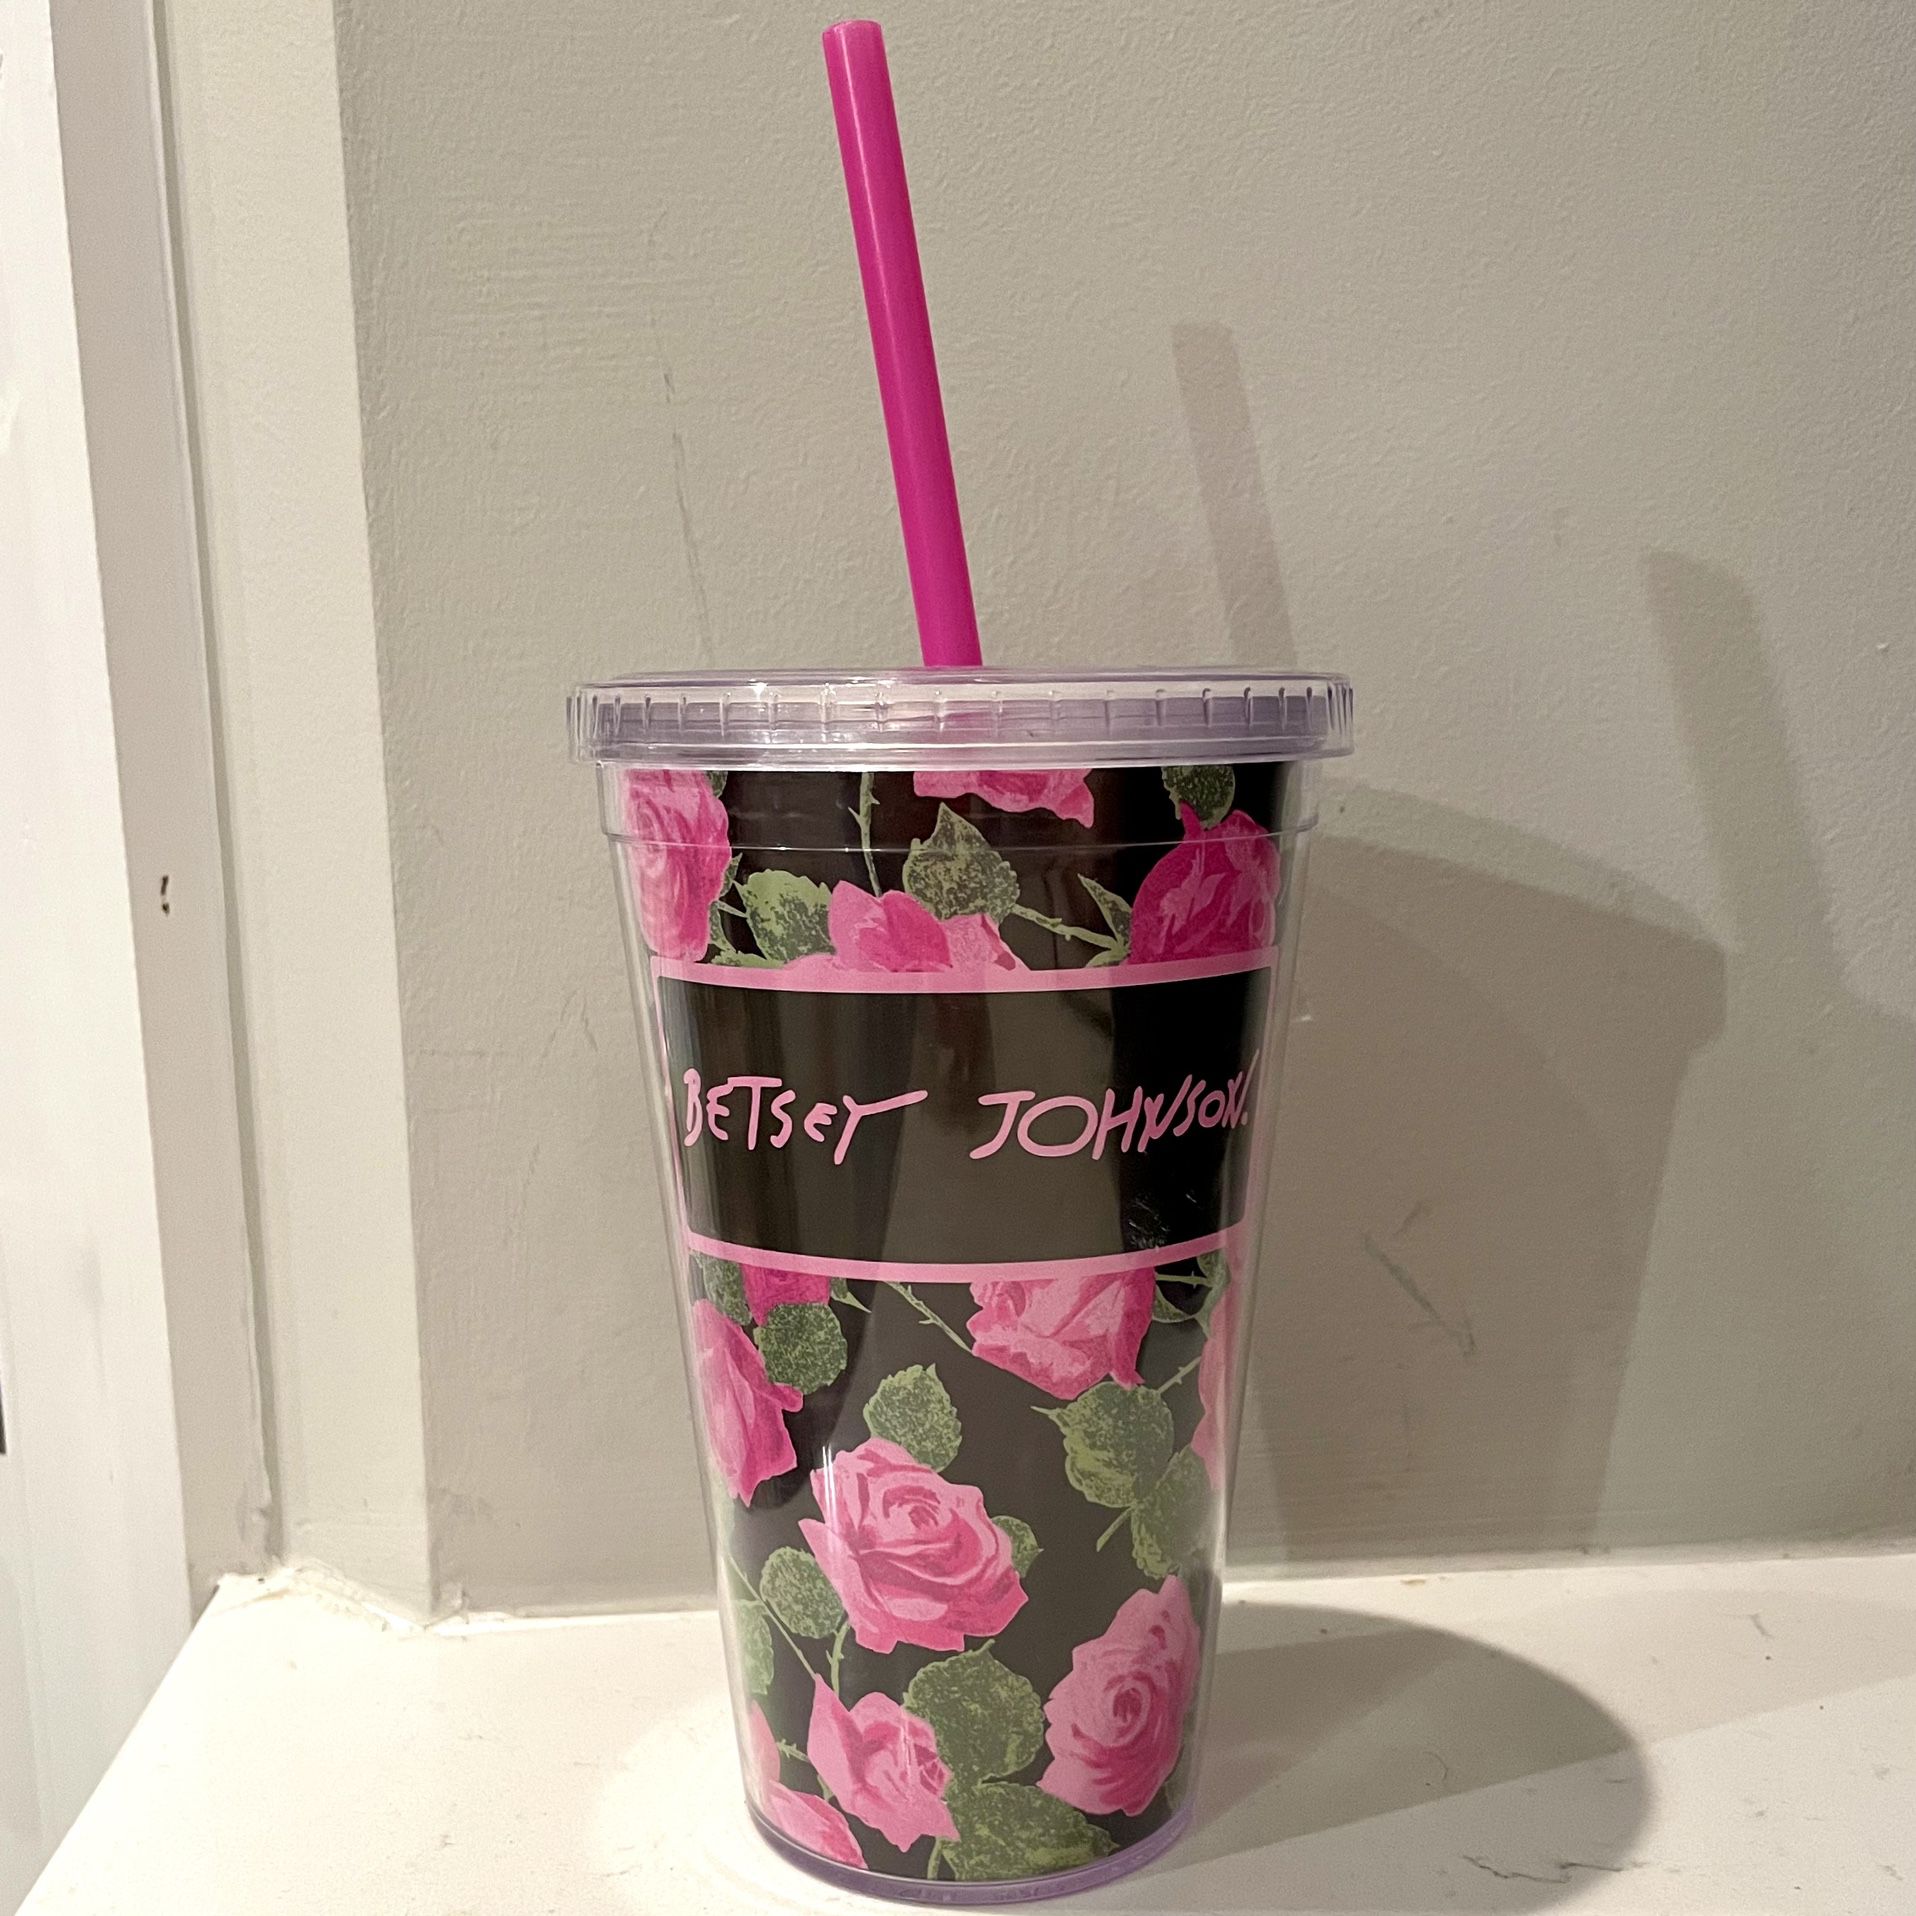 Betsey Johnson Tumbler Cup With Straw Pink Roses Floral Print